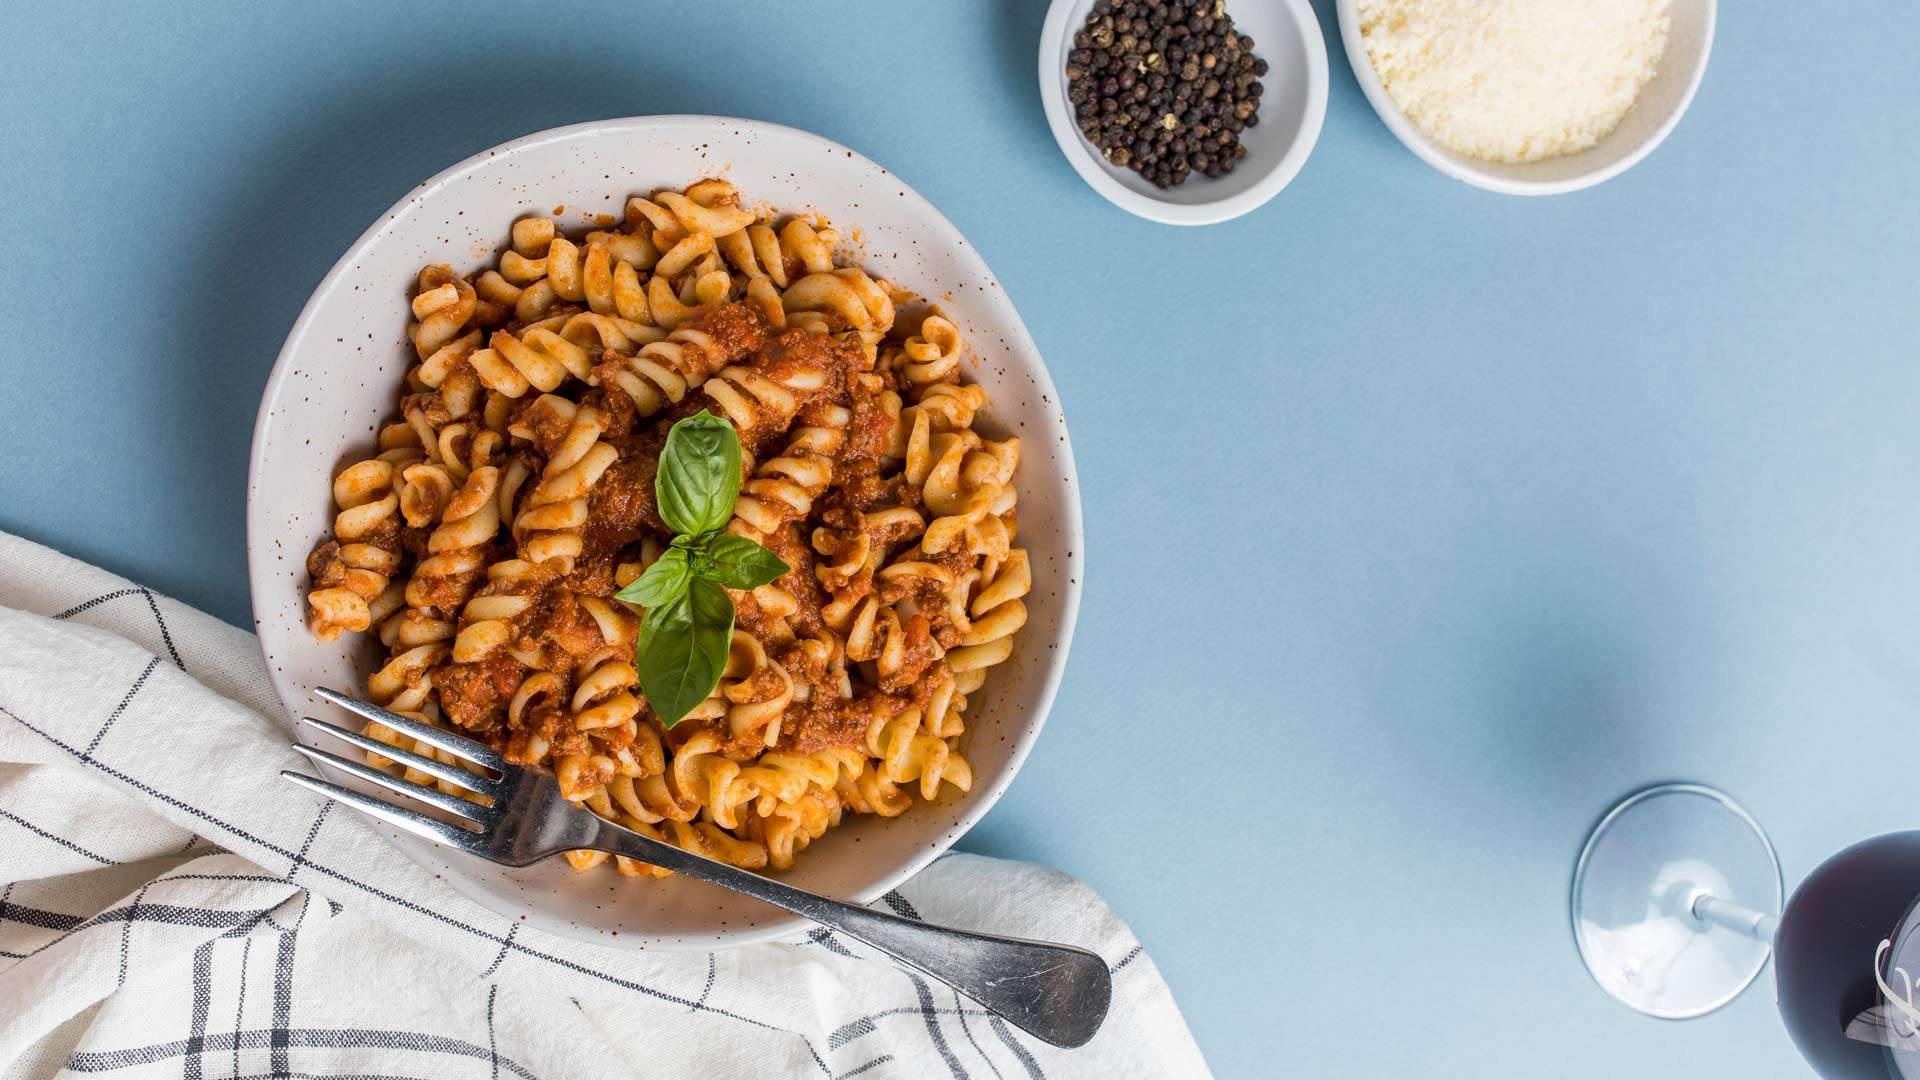 Fratelli Fresh Is Now Serving Up $10 Bowls of Pasta and $5 Wines for Weekday Lunches